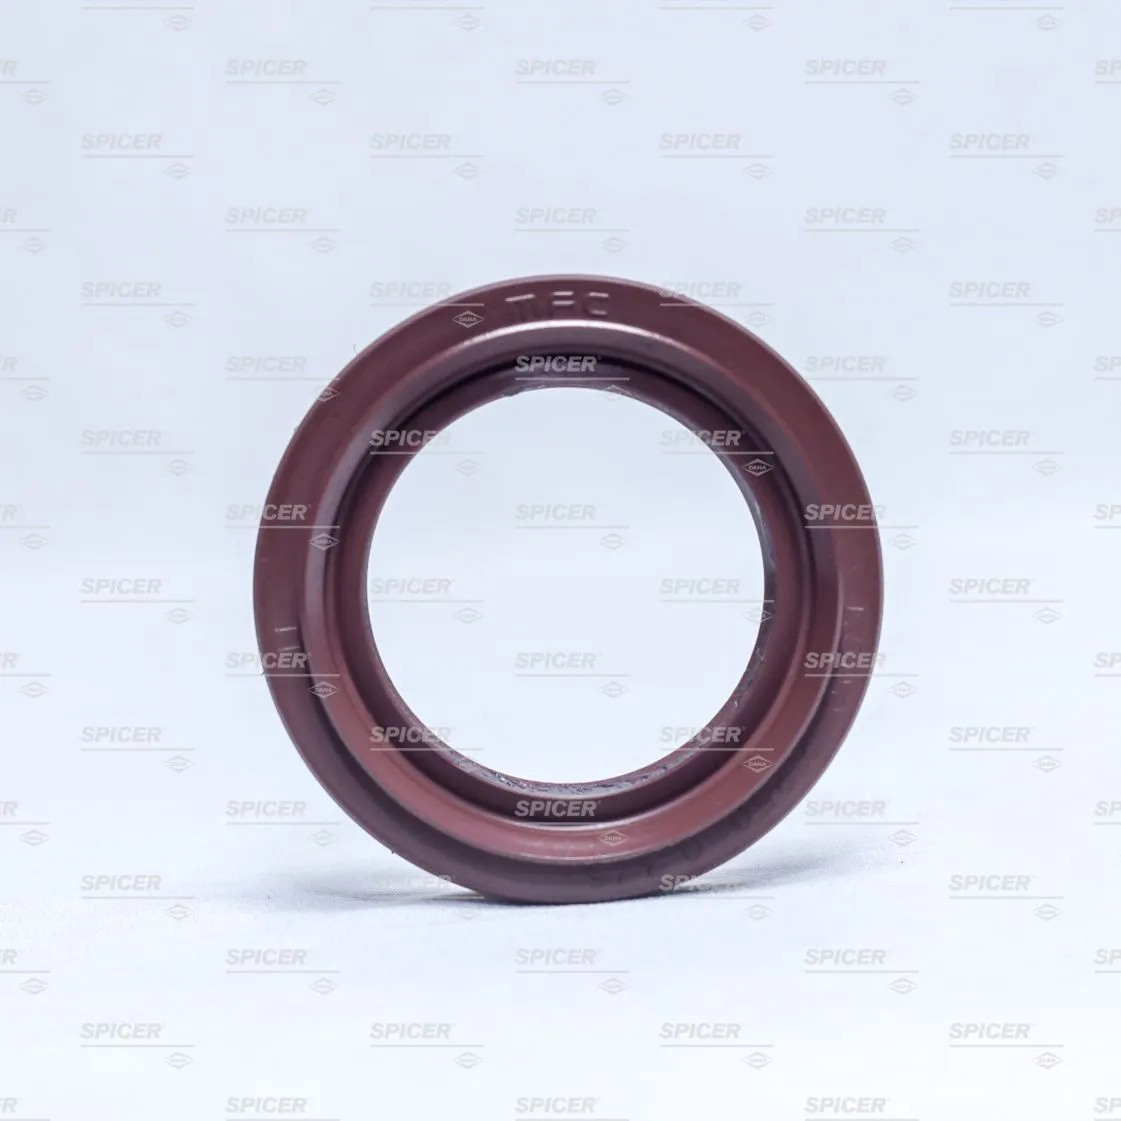 Spicer + Axle + Seals And Piston Rings + Seal - Oil + S20HH127-I_SP + buy